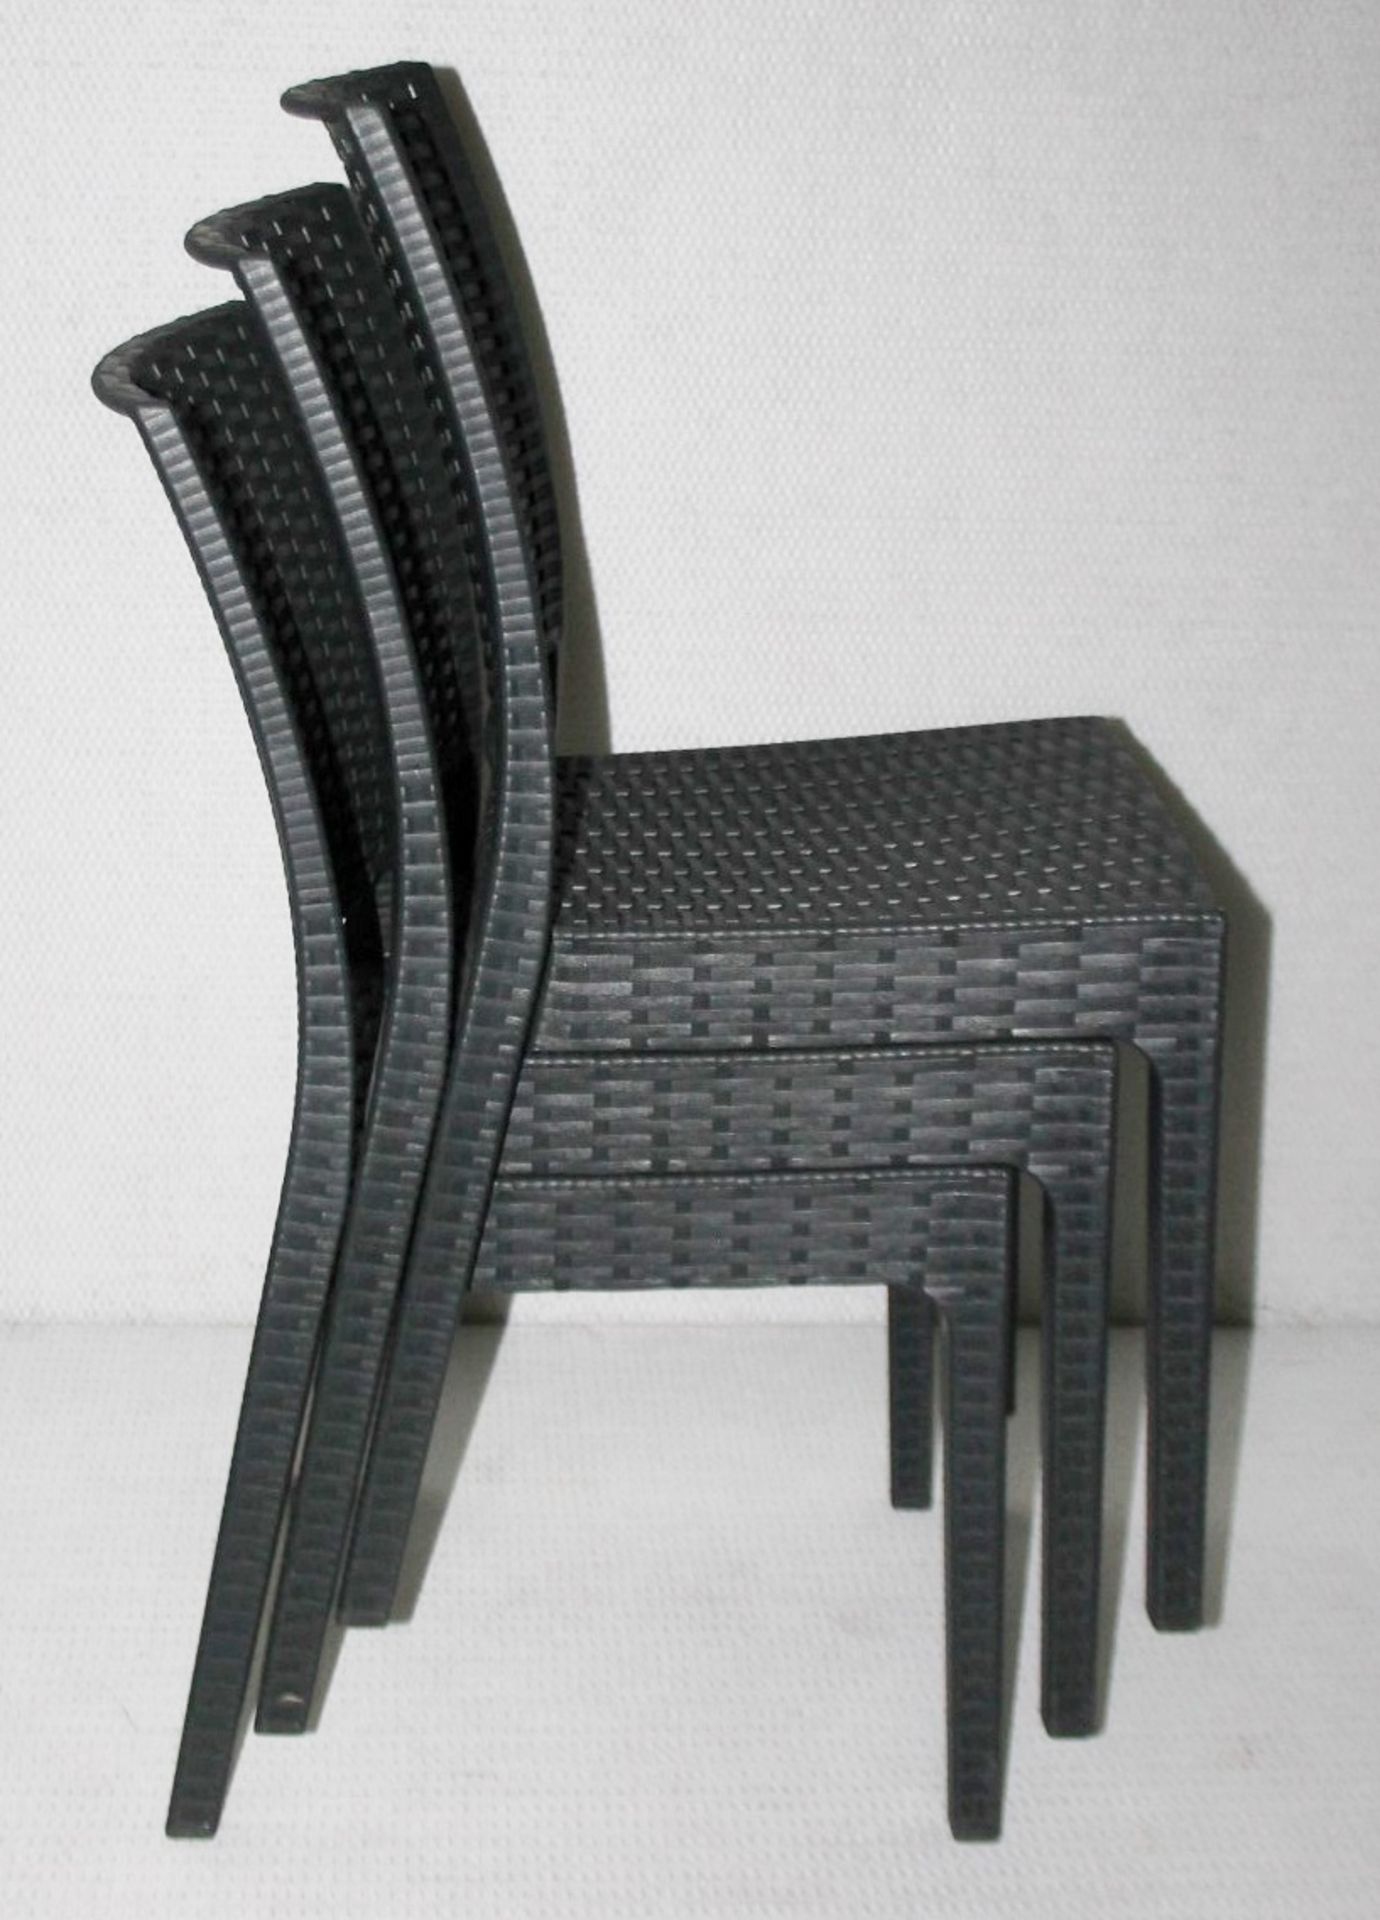 4 x SIESTA EXCLUSIVE 'Florida' Commercial Stackable Rattan-style Chairs In Dark Grey - RRP £320.00 - Image 4 of 13